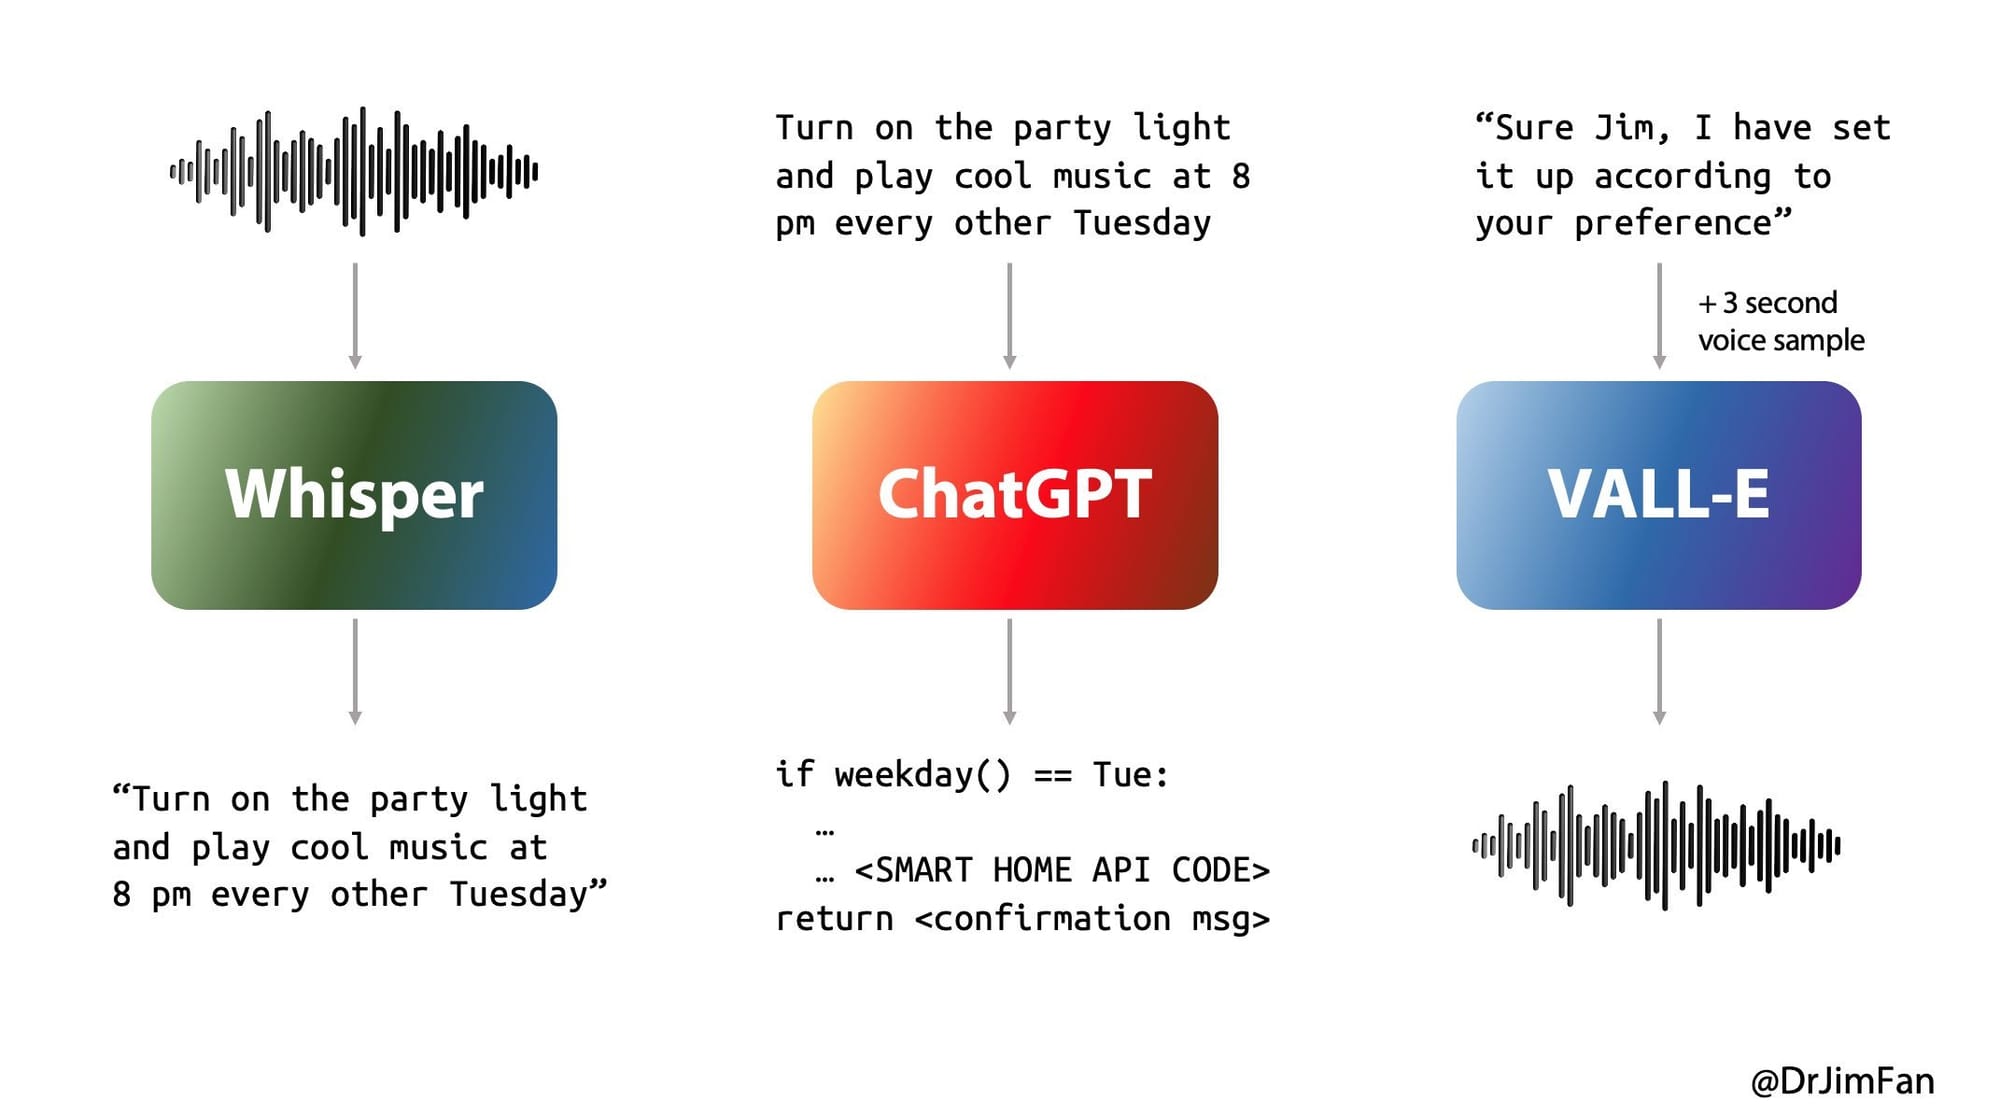 Talking the Talk: Will OpenAI's New Voice Assistant Redefine Real-Time Interaction?